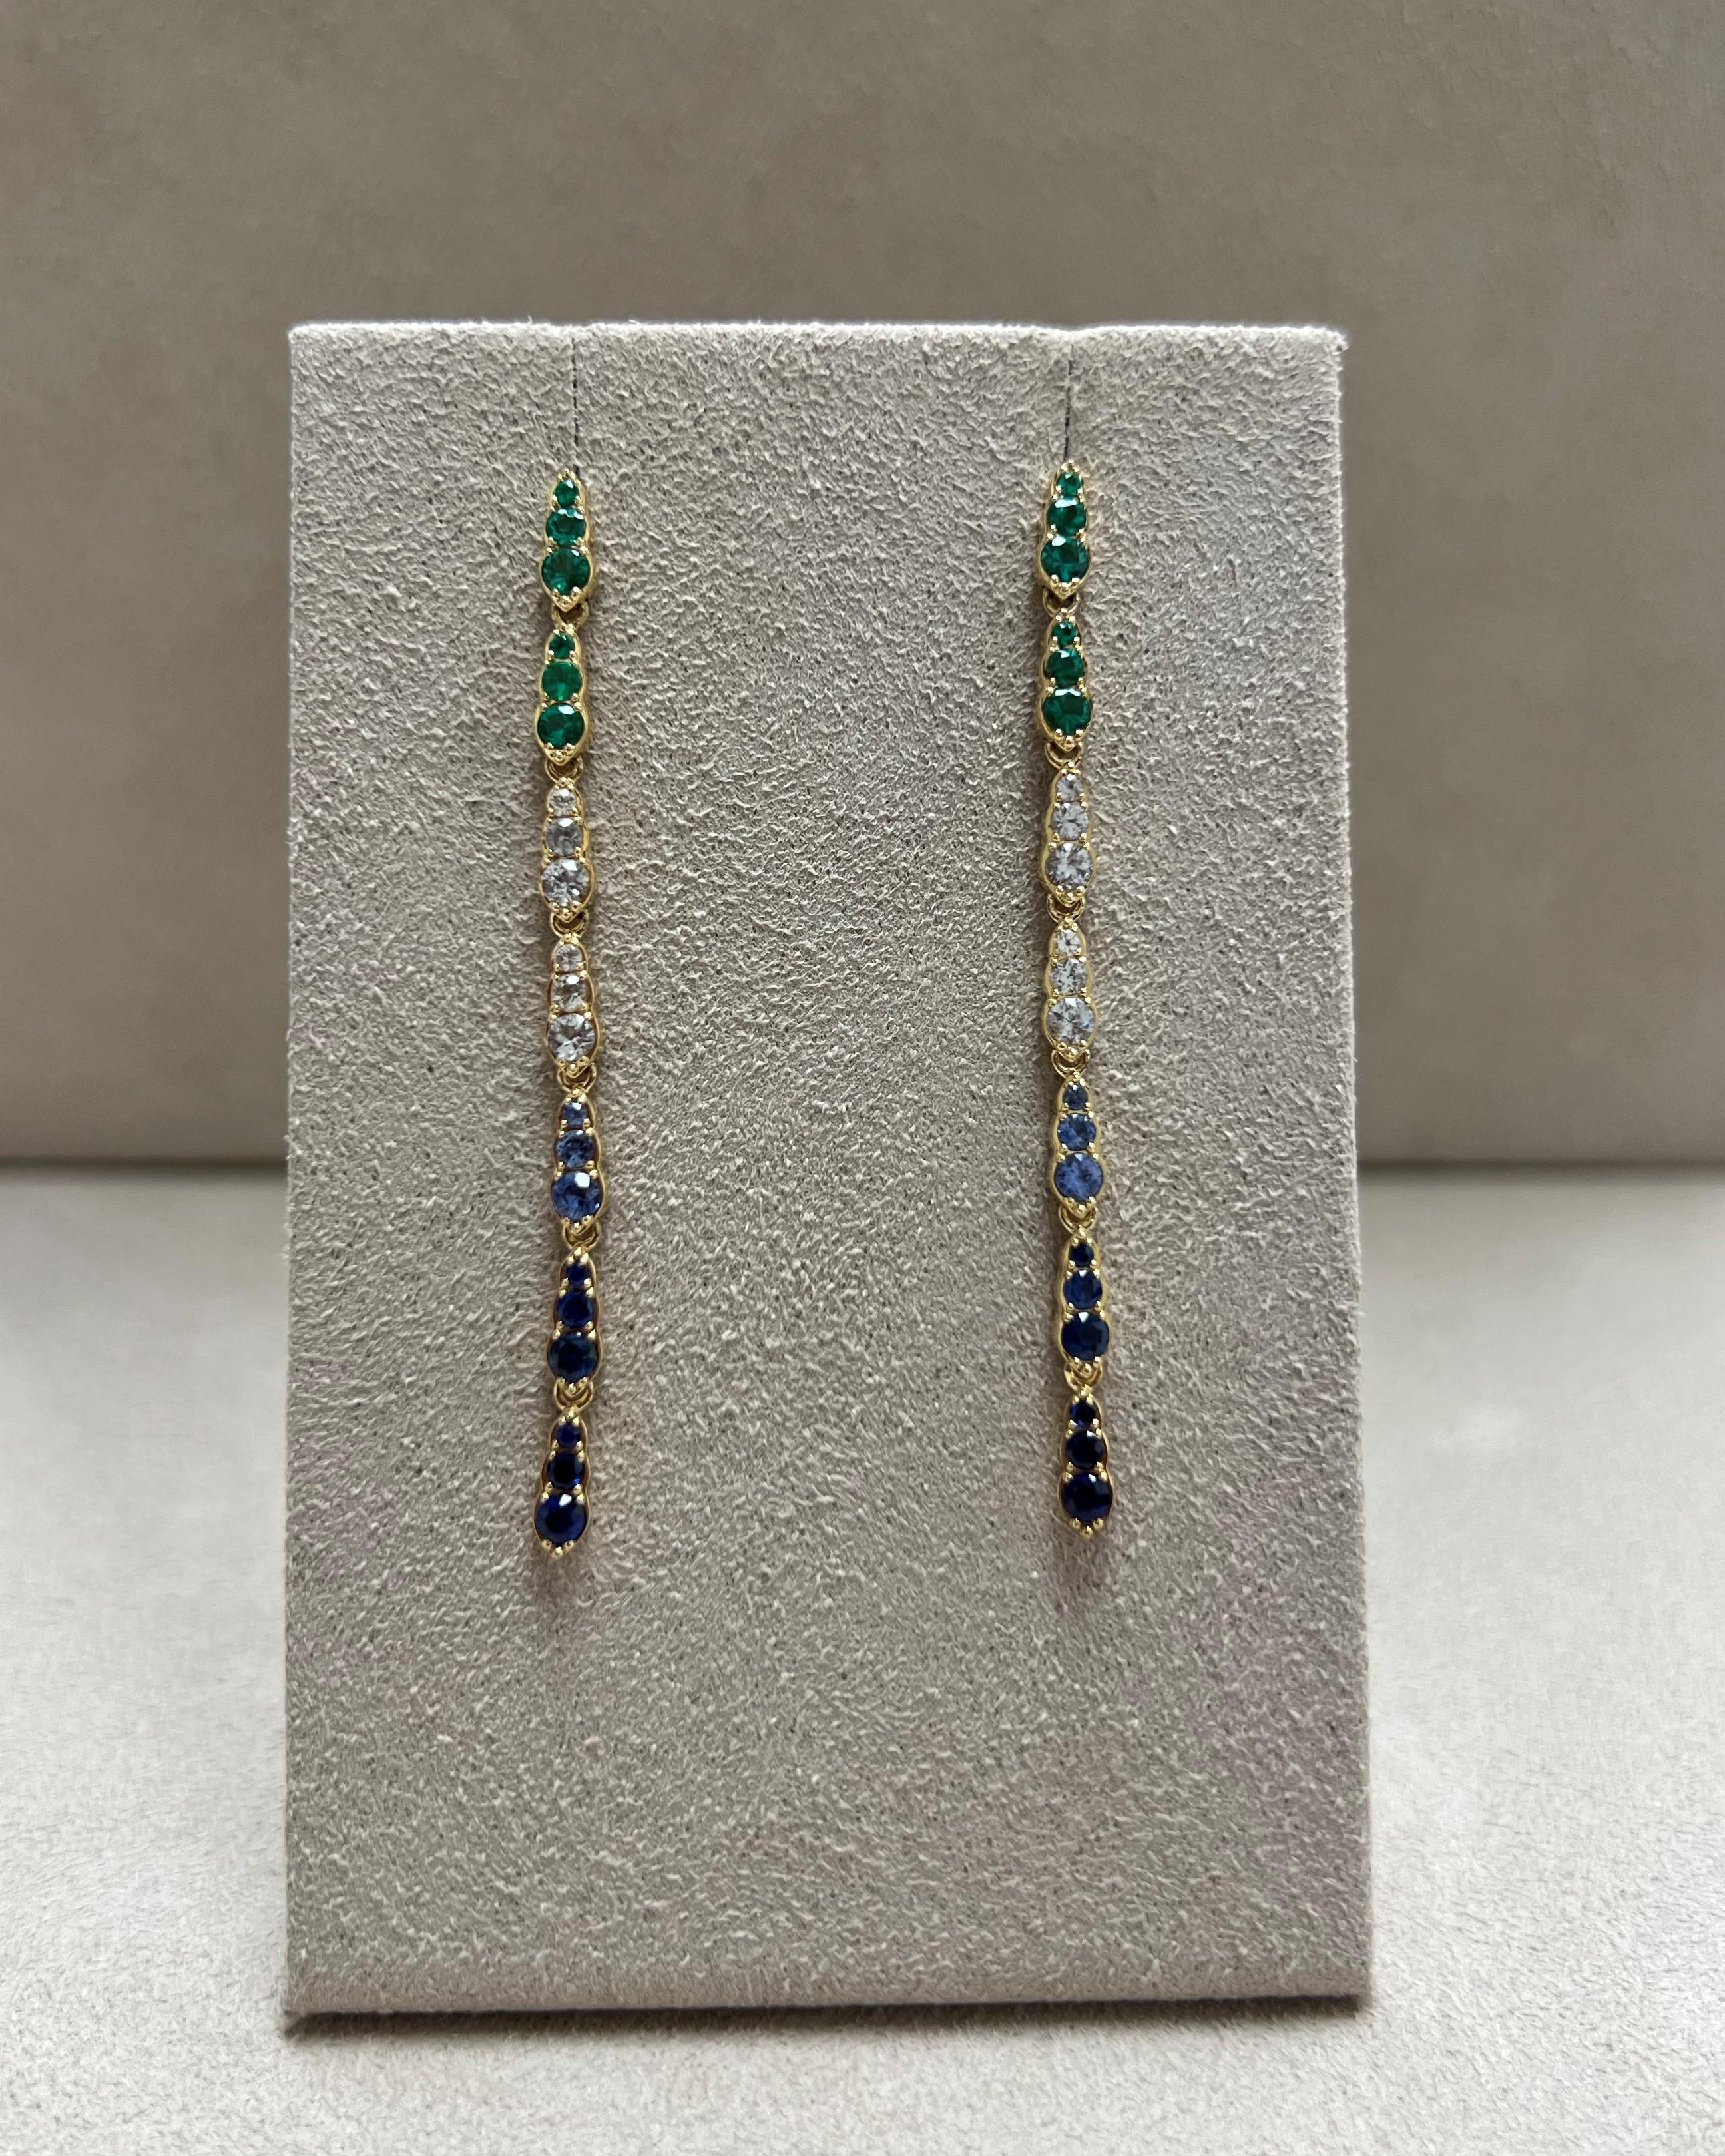 Created in 18 karat yellow gold
Emeralds 0.35 carat approx.
Sapphires 1.30 carats approx.
Post backs for pierced ears
Limited edition

Intricately crafted in 18 carat yellow gold, these limited edition earrings sport brilliant emeralds of 0.35 carat